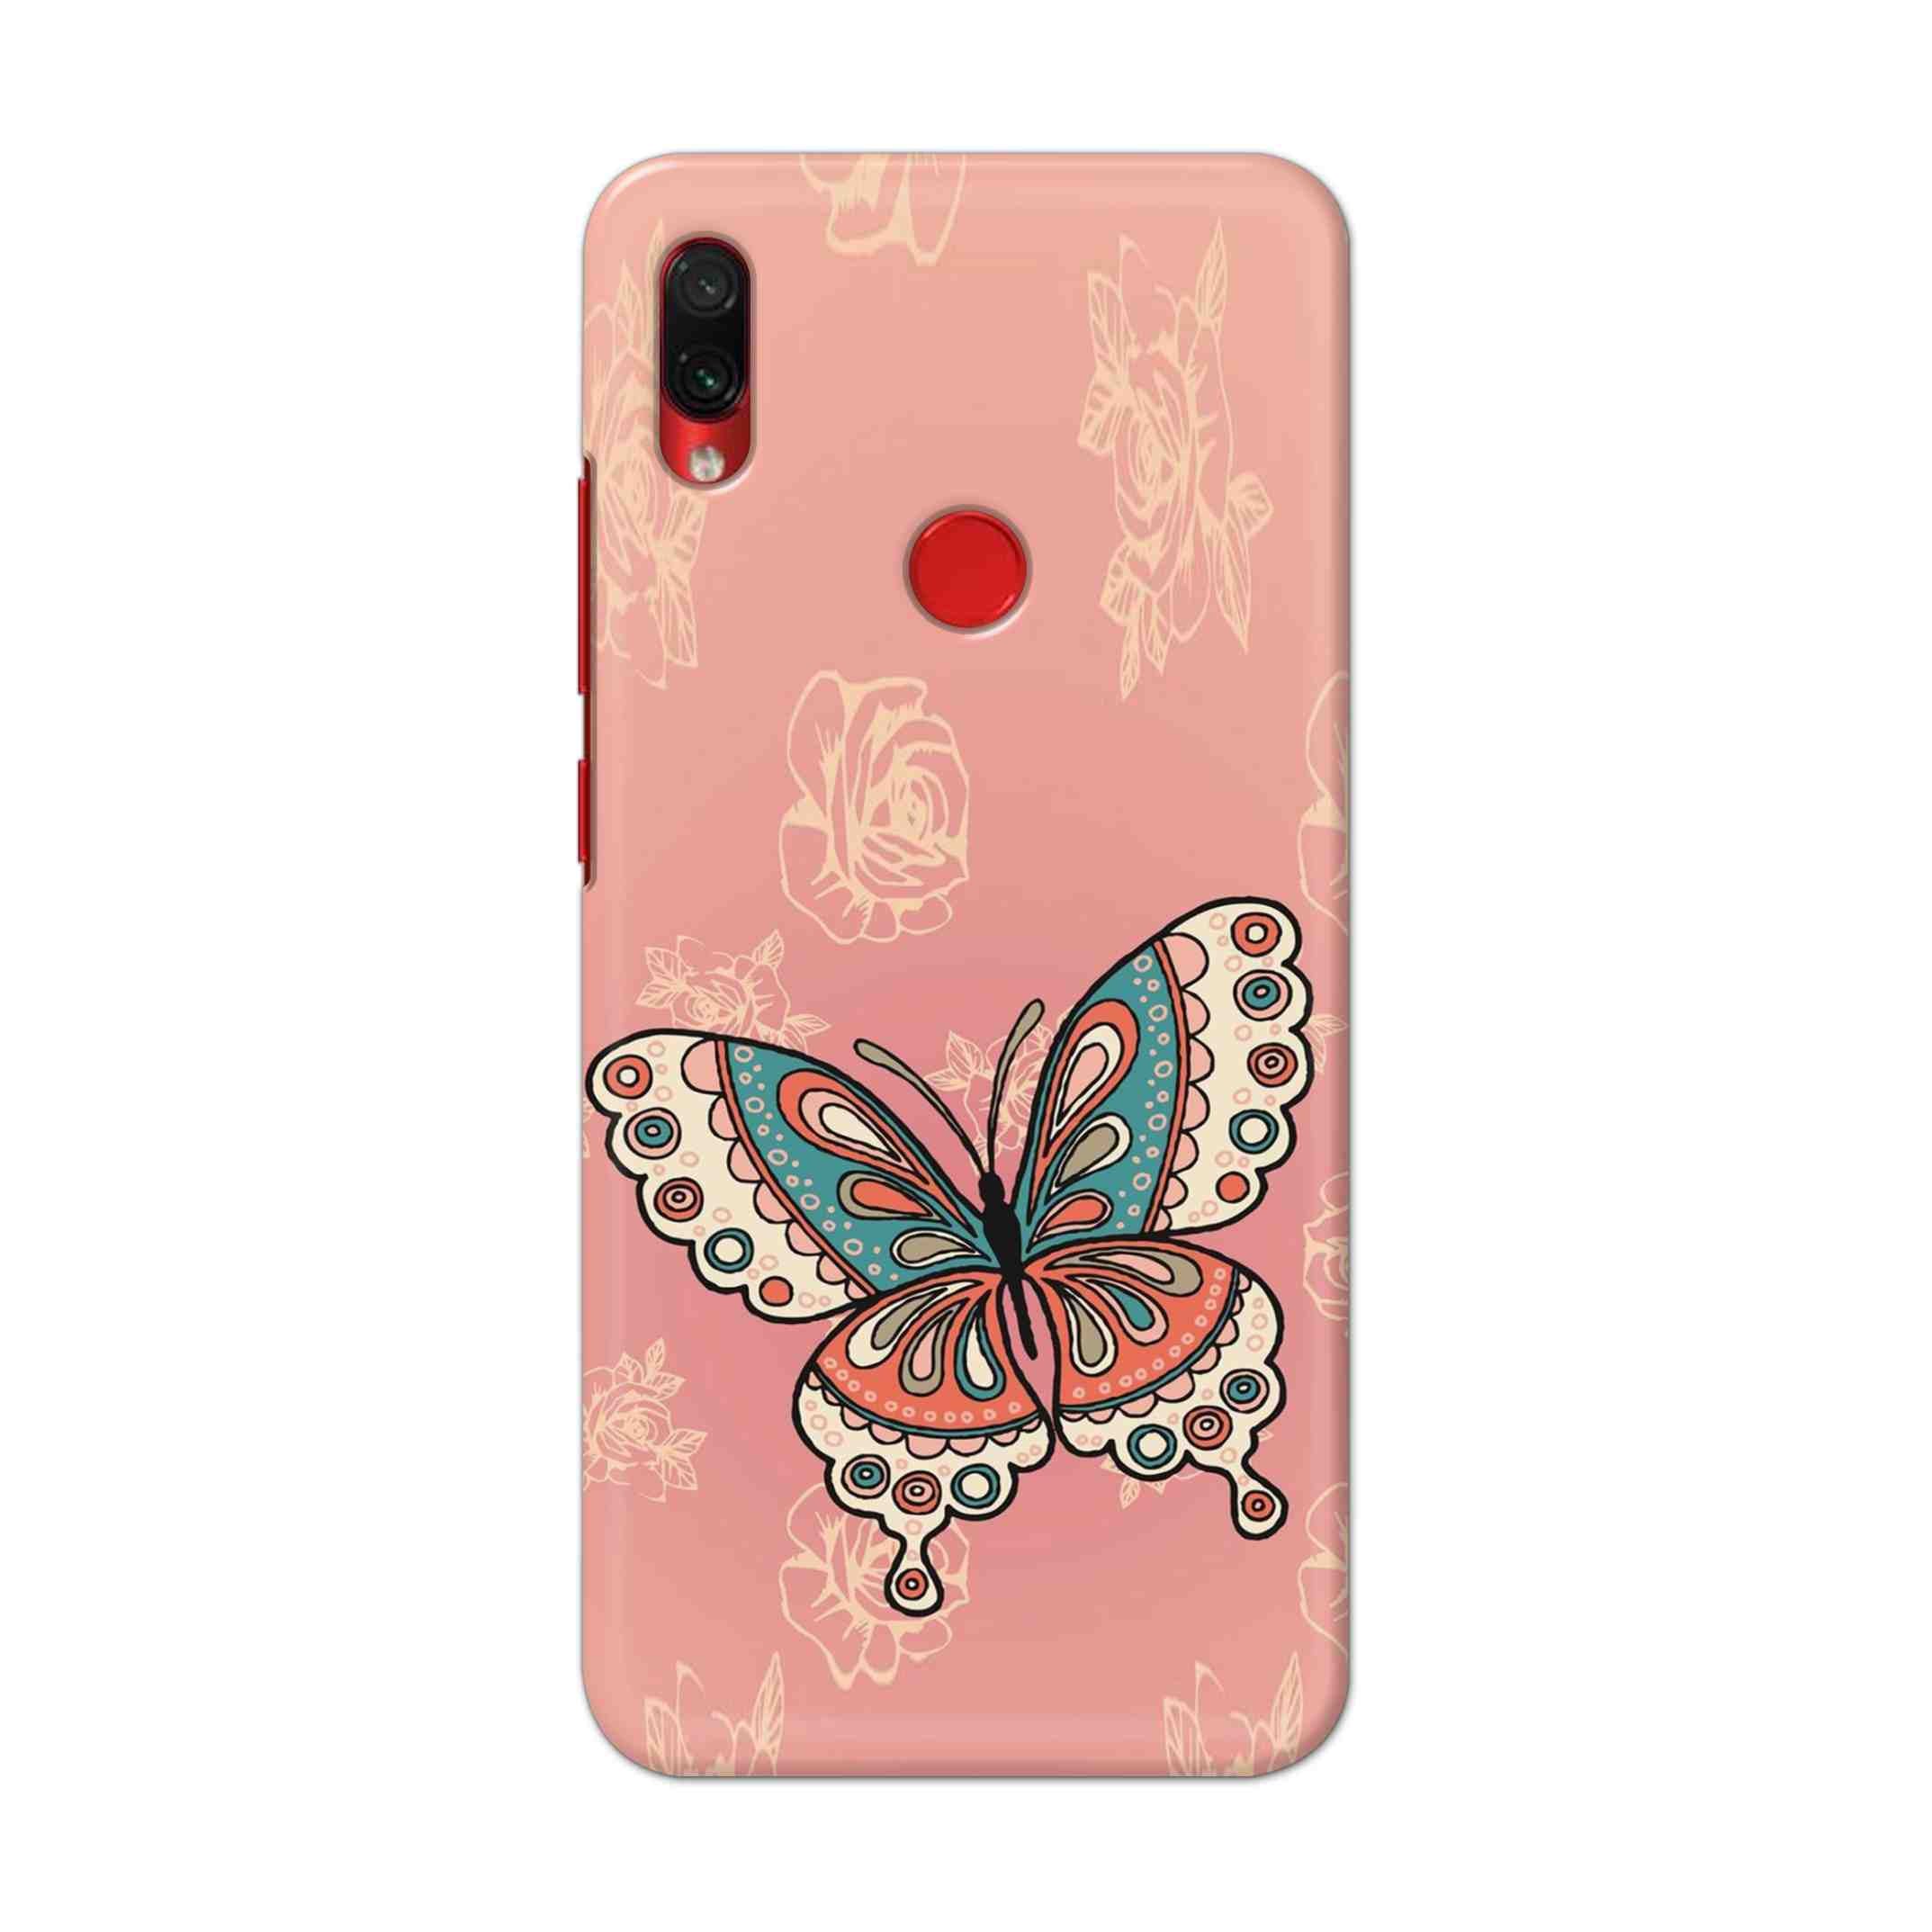 Buy Butterfly Hard Back Mobile Phone Case Cover For Xiaomi Redmi Note 7S Online